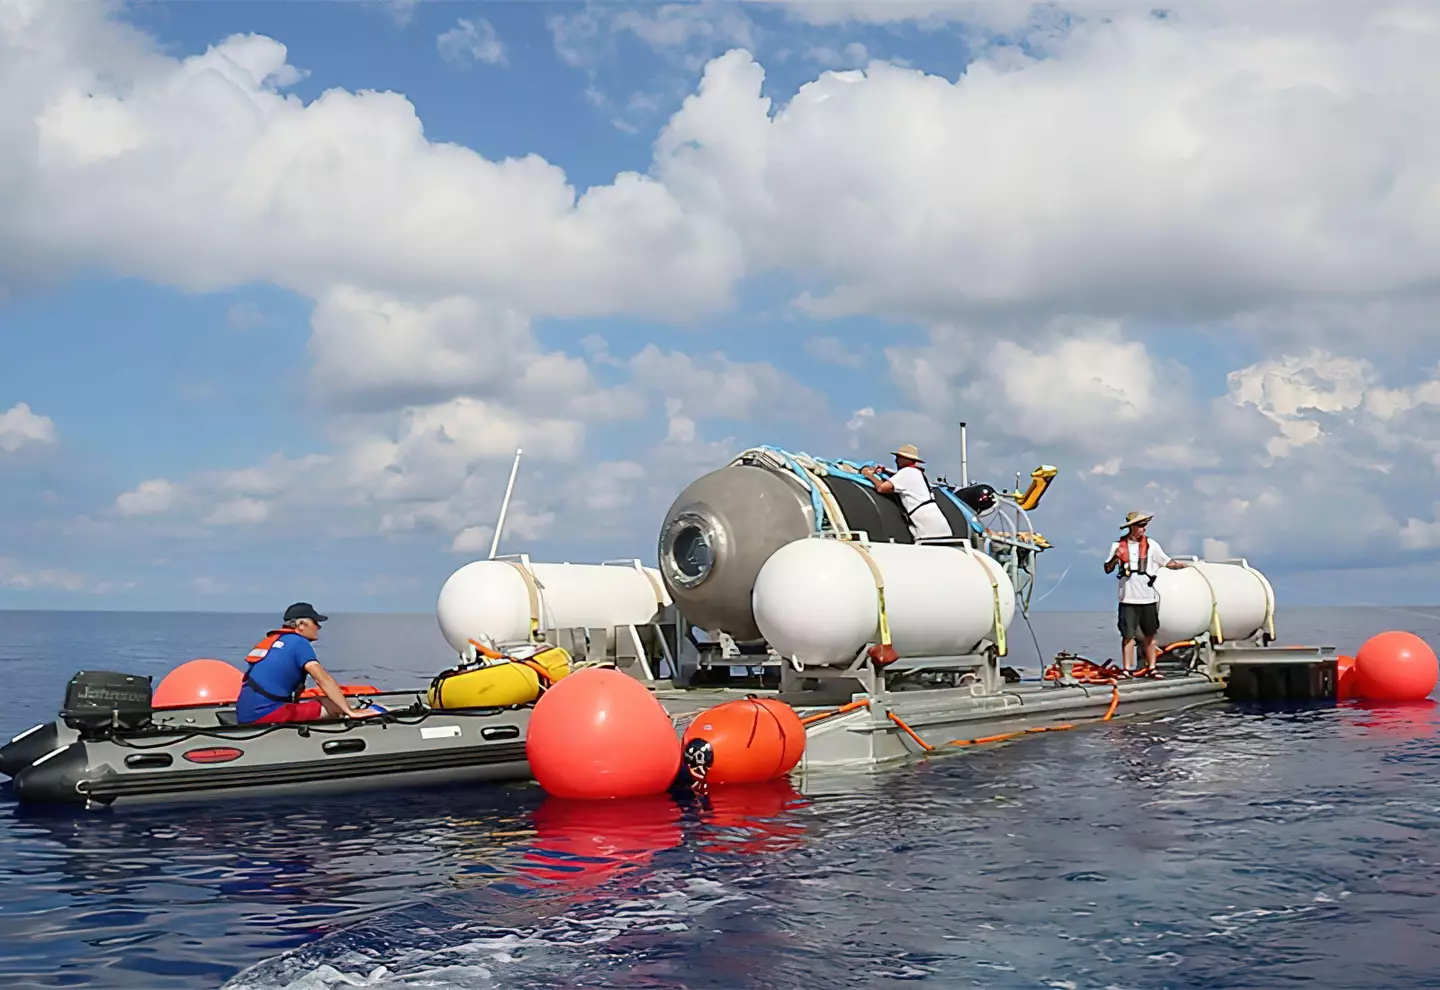 The Titan submersible before it was destroyed, police will now investigate the incident.